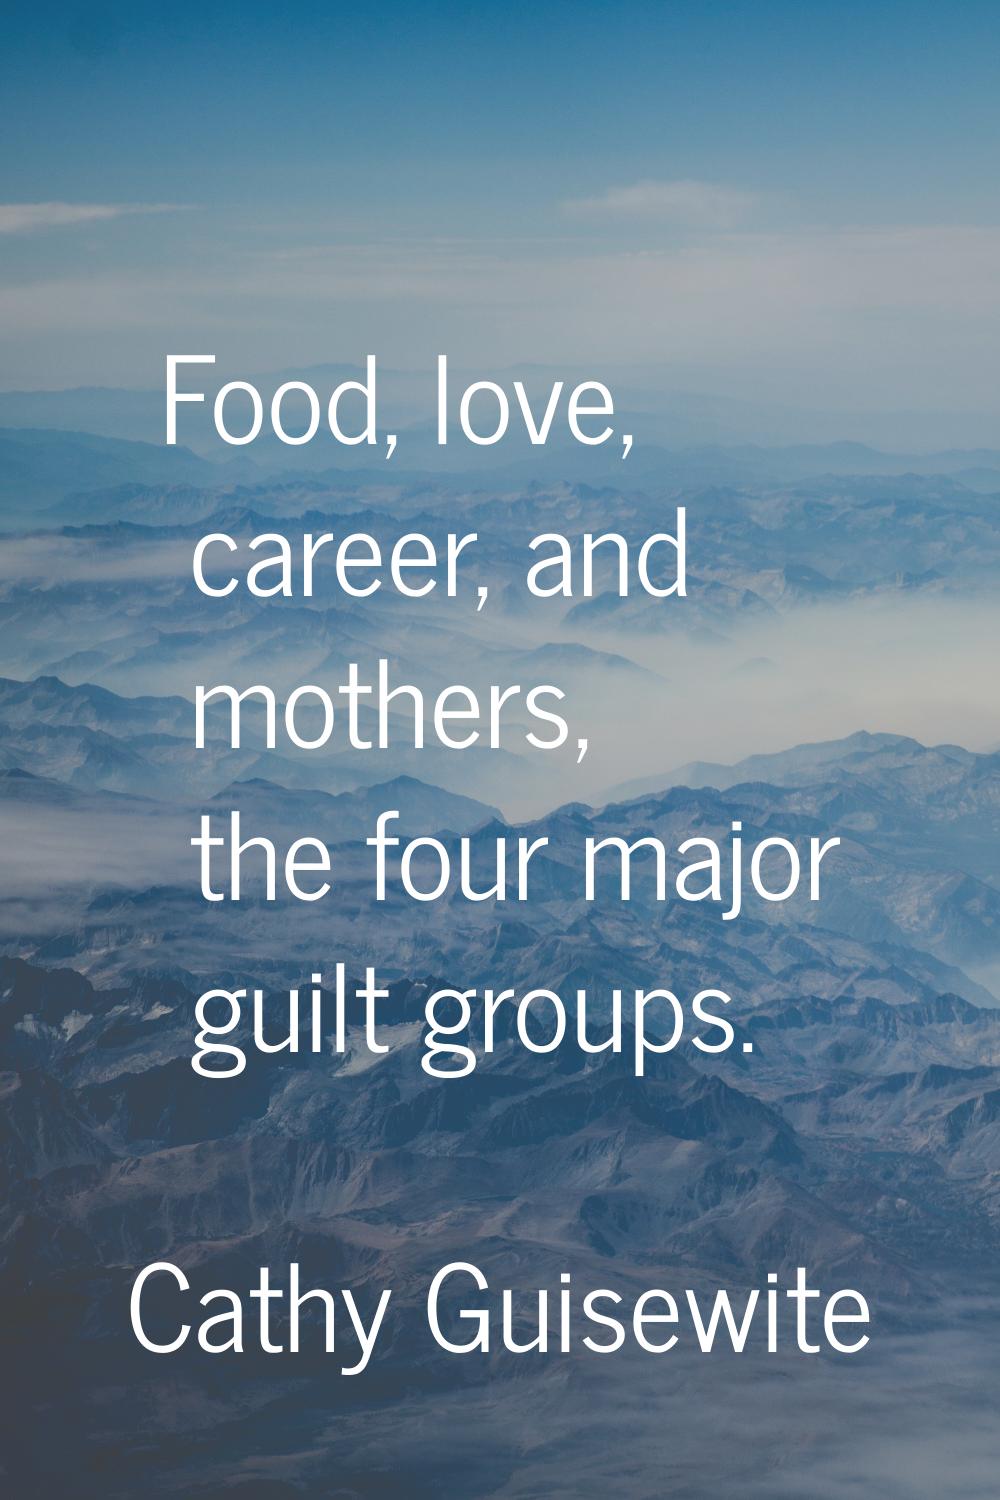 Food, love, career, and mothers, the four major guilt groups.